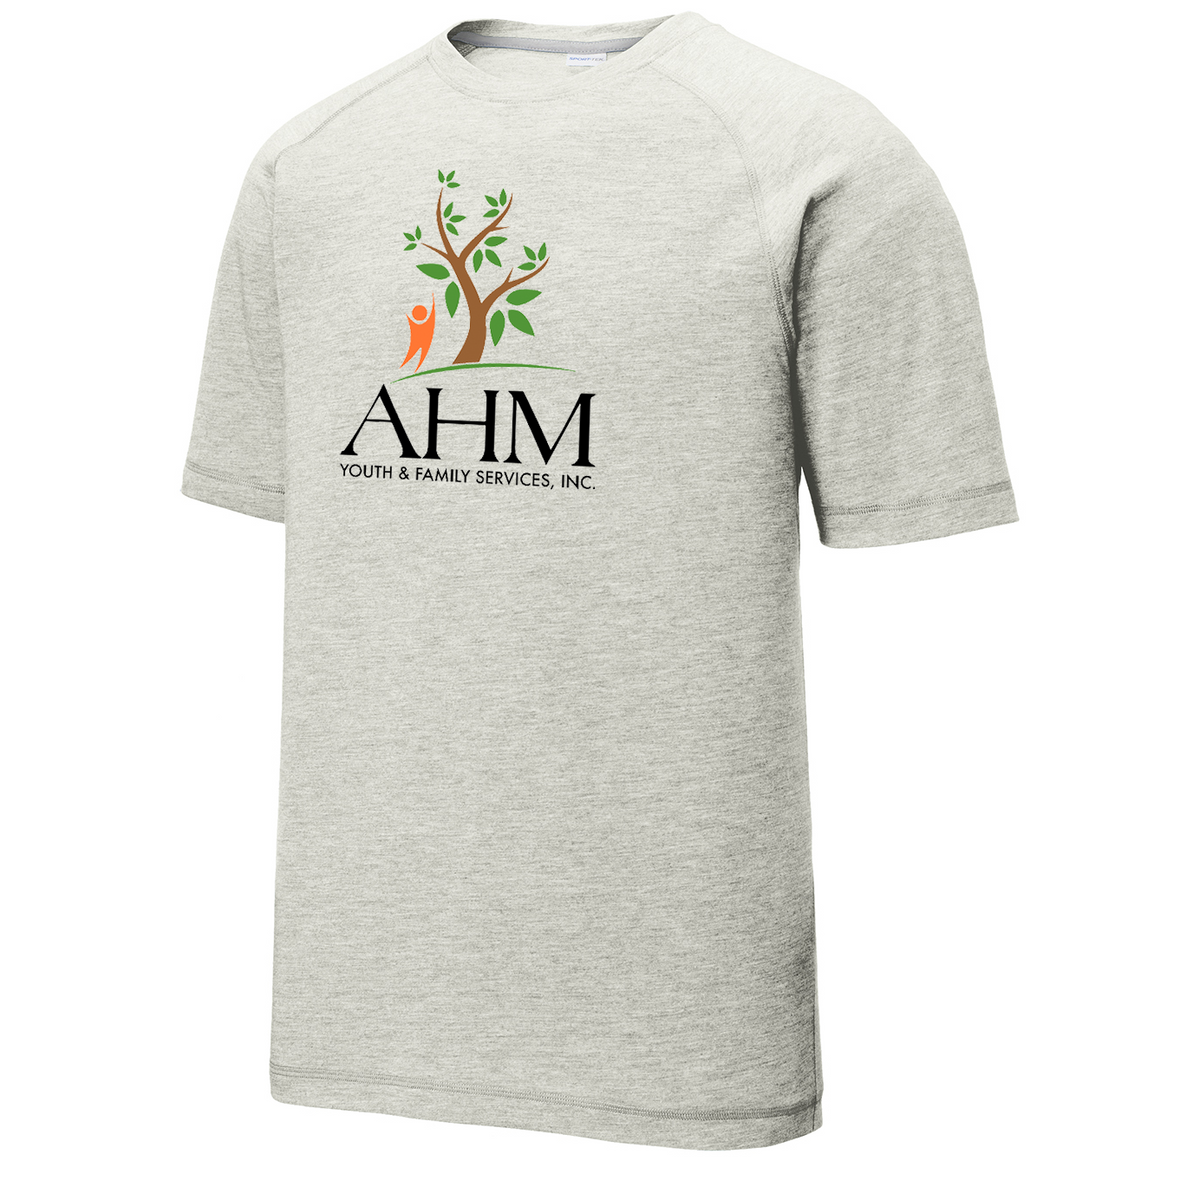 AHM Youth & Family Services Raglan CottonTouch Tee